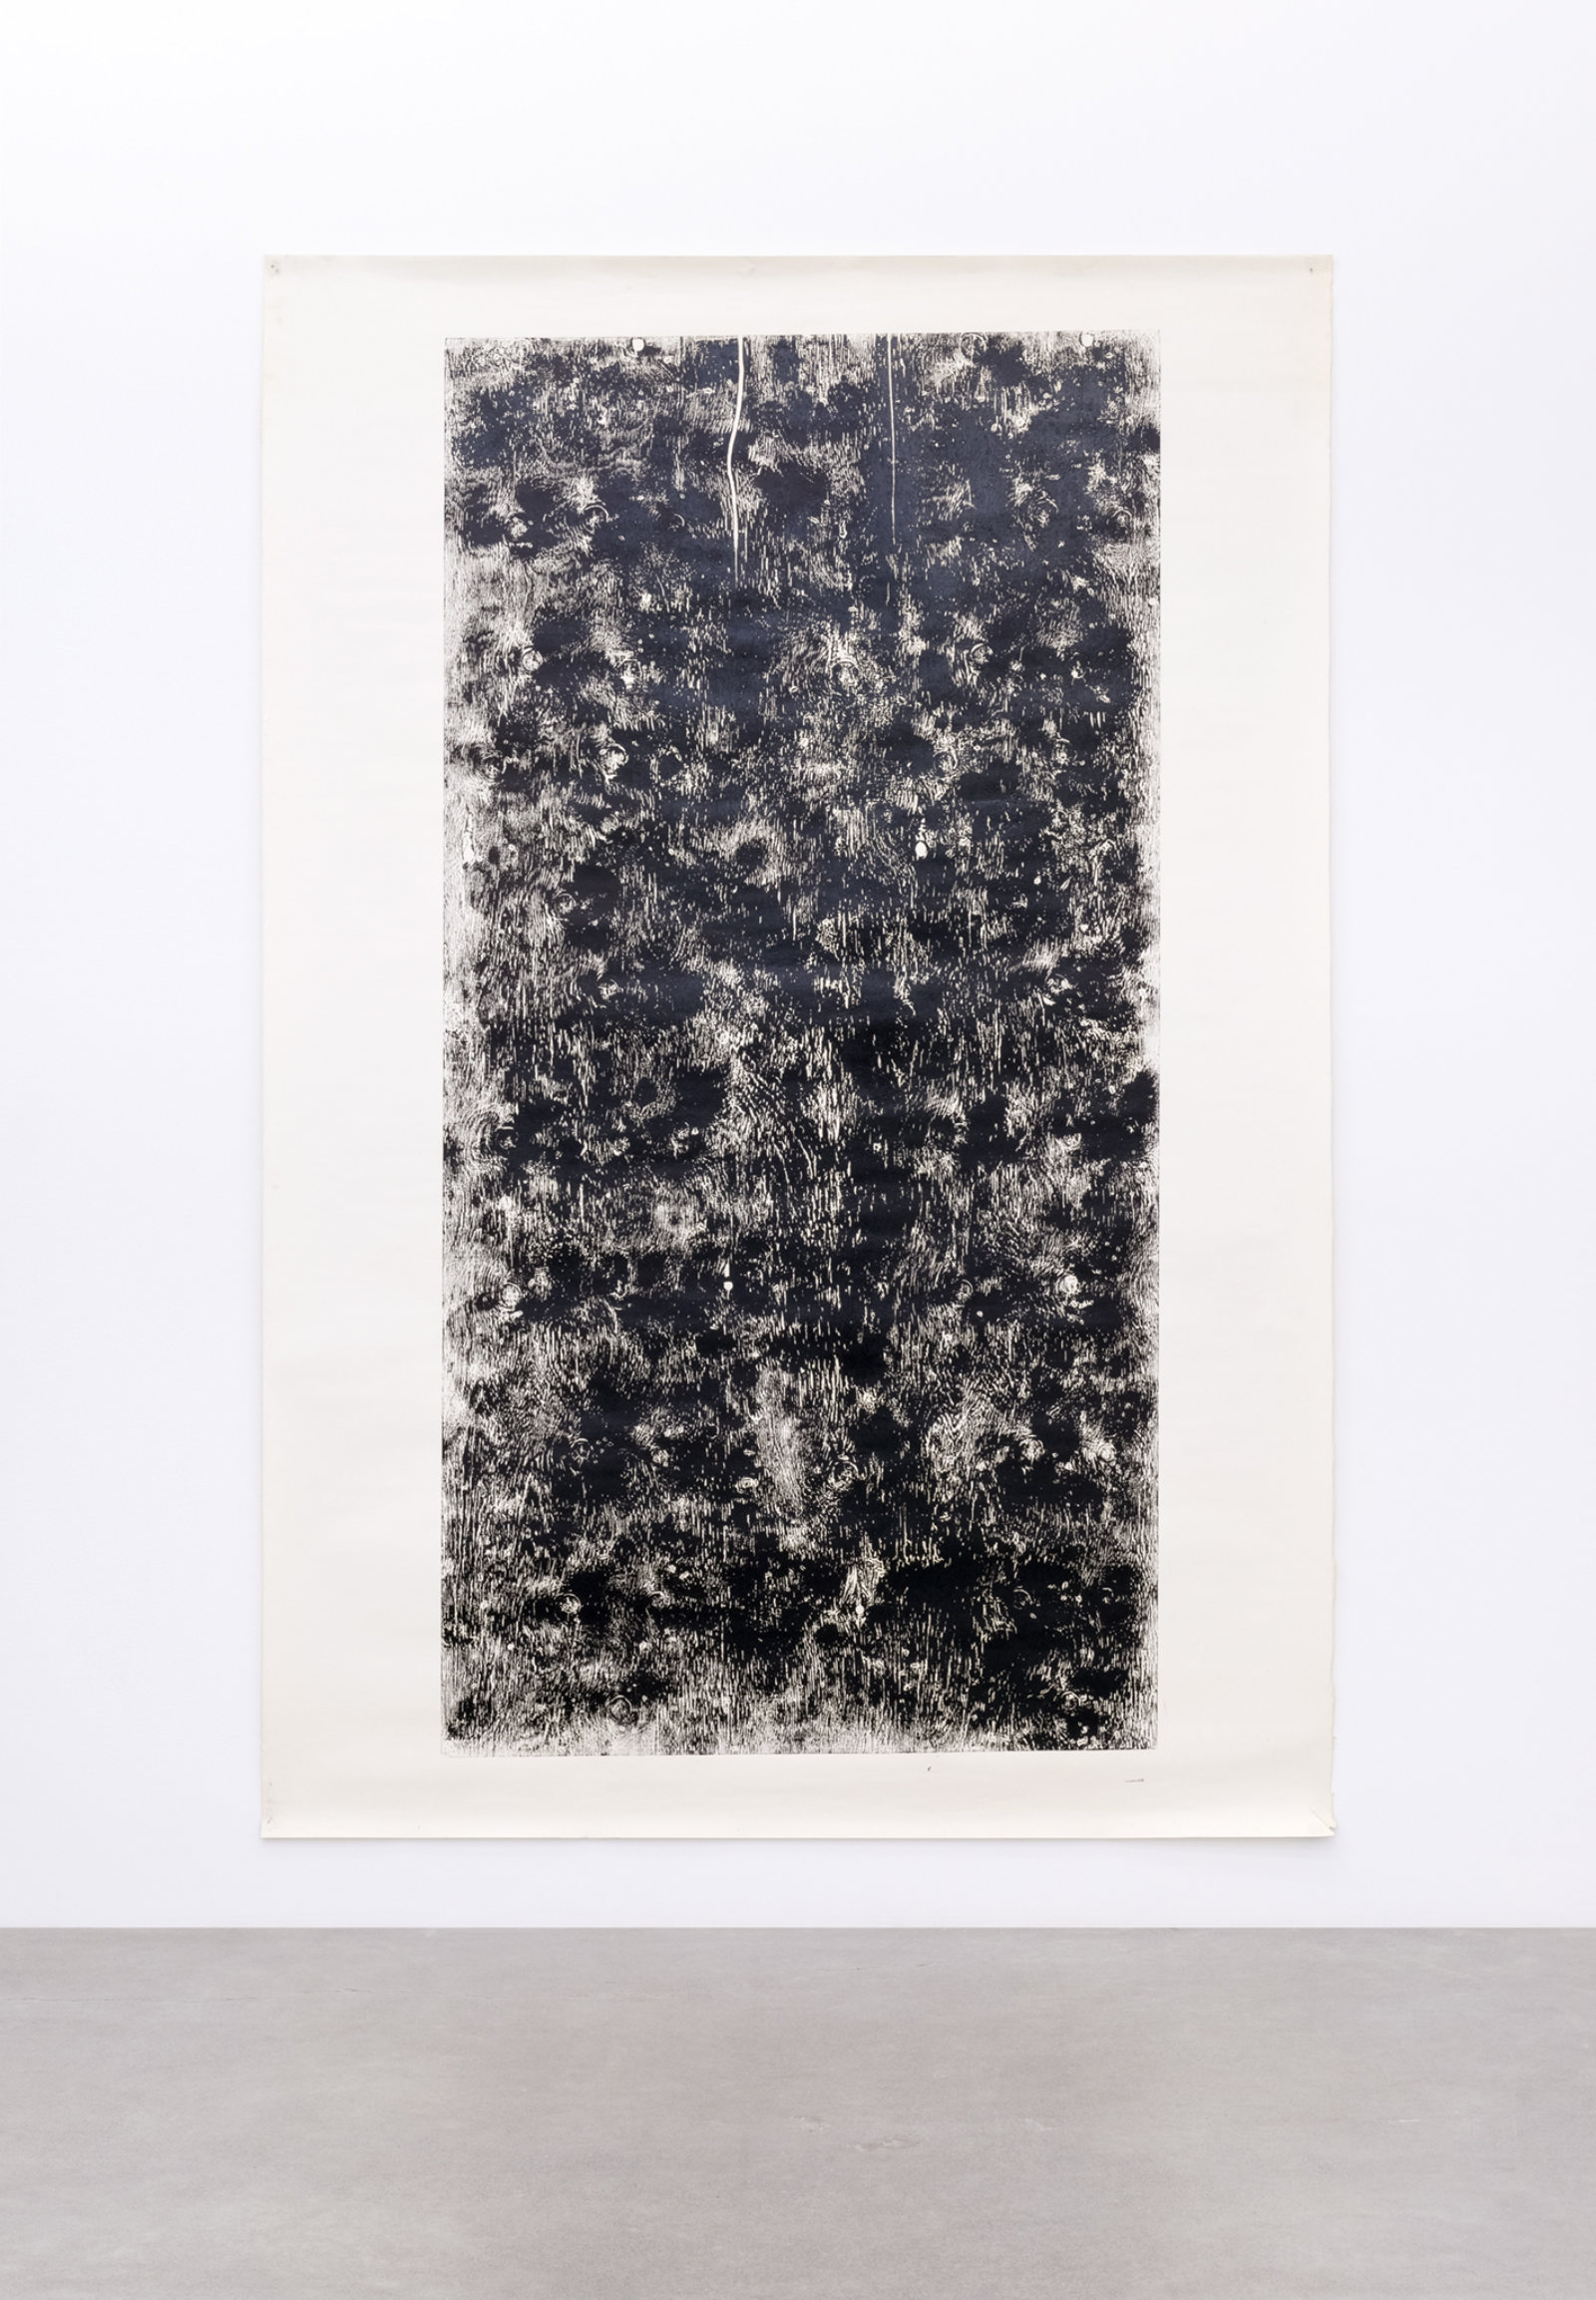 Ian Wallace, Untitled (Monoprint), 1990, ink on paper, 108 x 72 in. (274 x 183 cm)